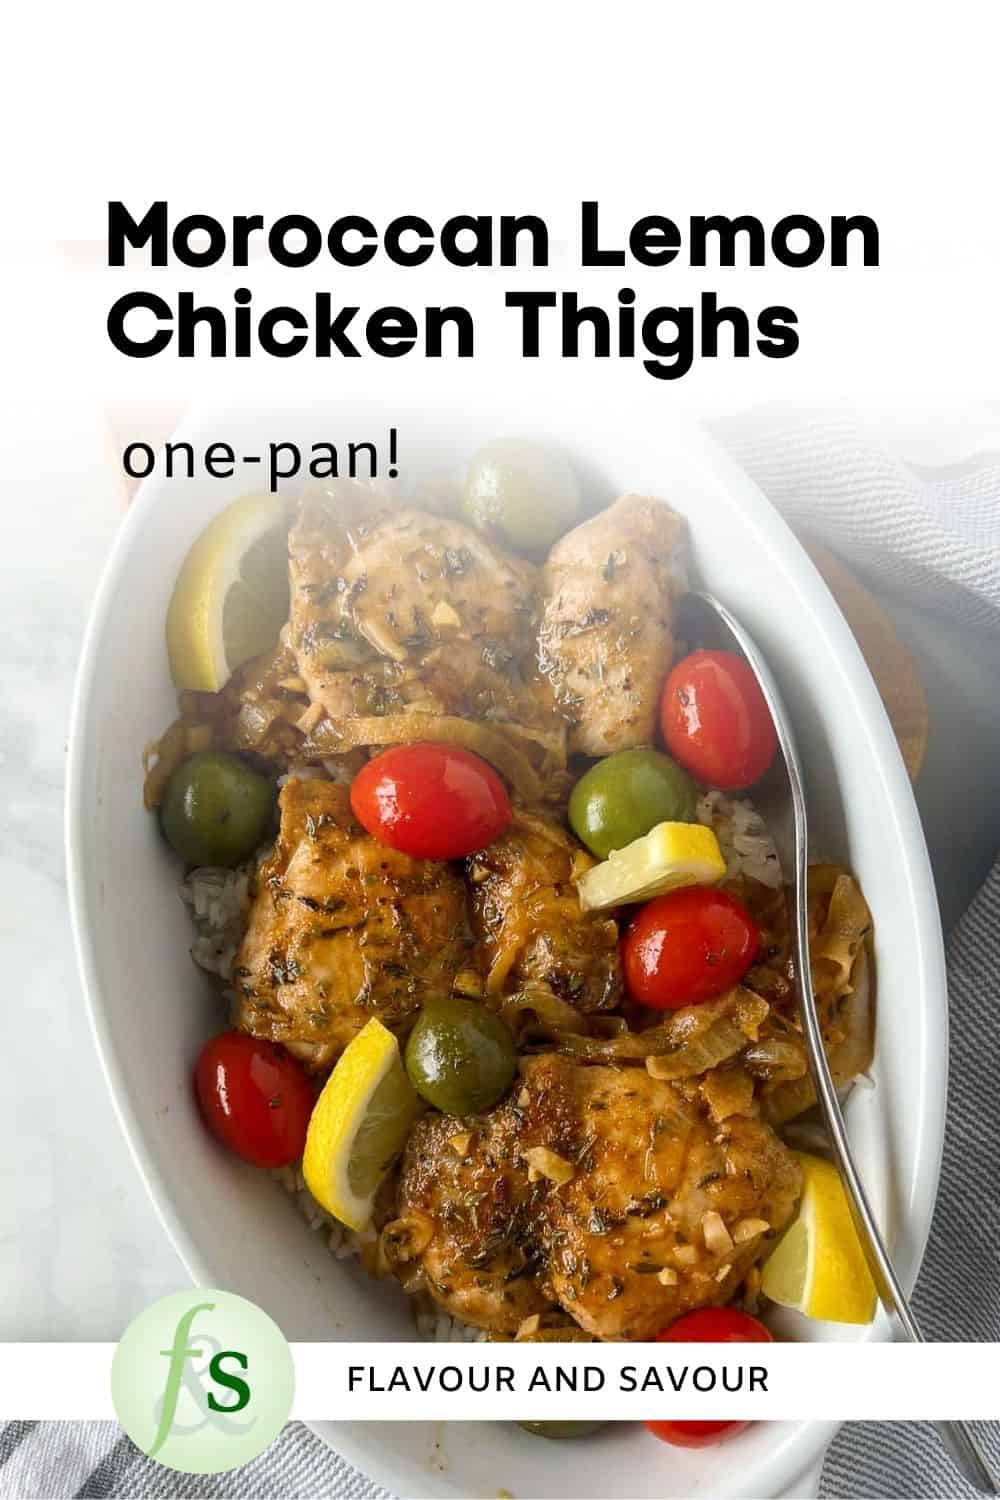 Image with txt overlay for Moroccan Lemon Chicken Thighs with Olives.